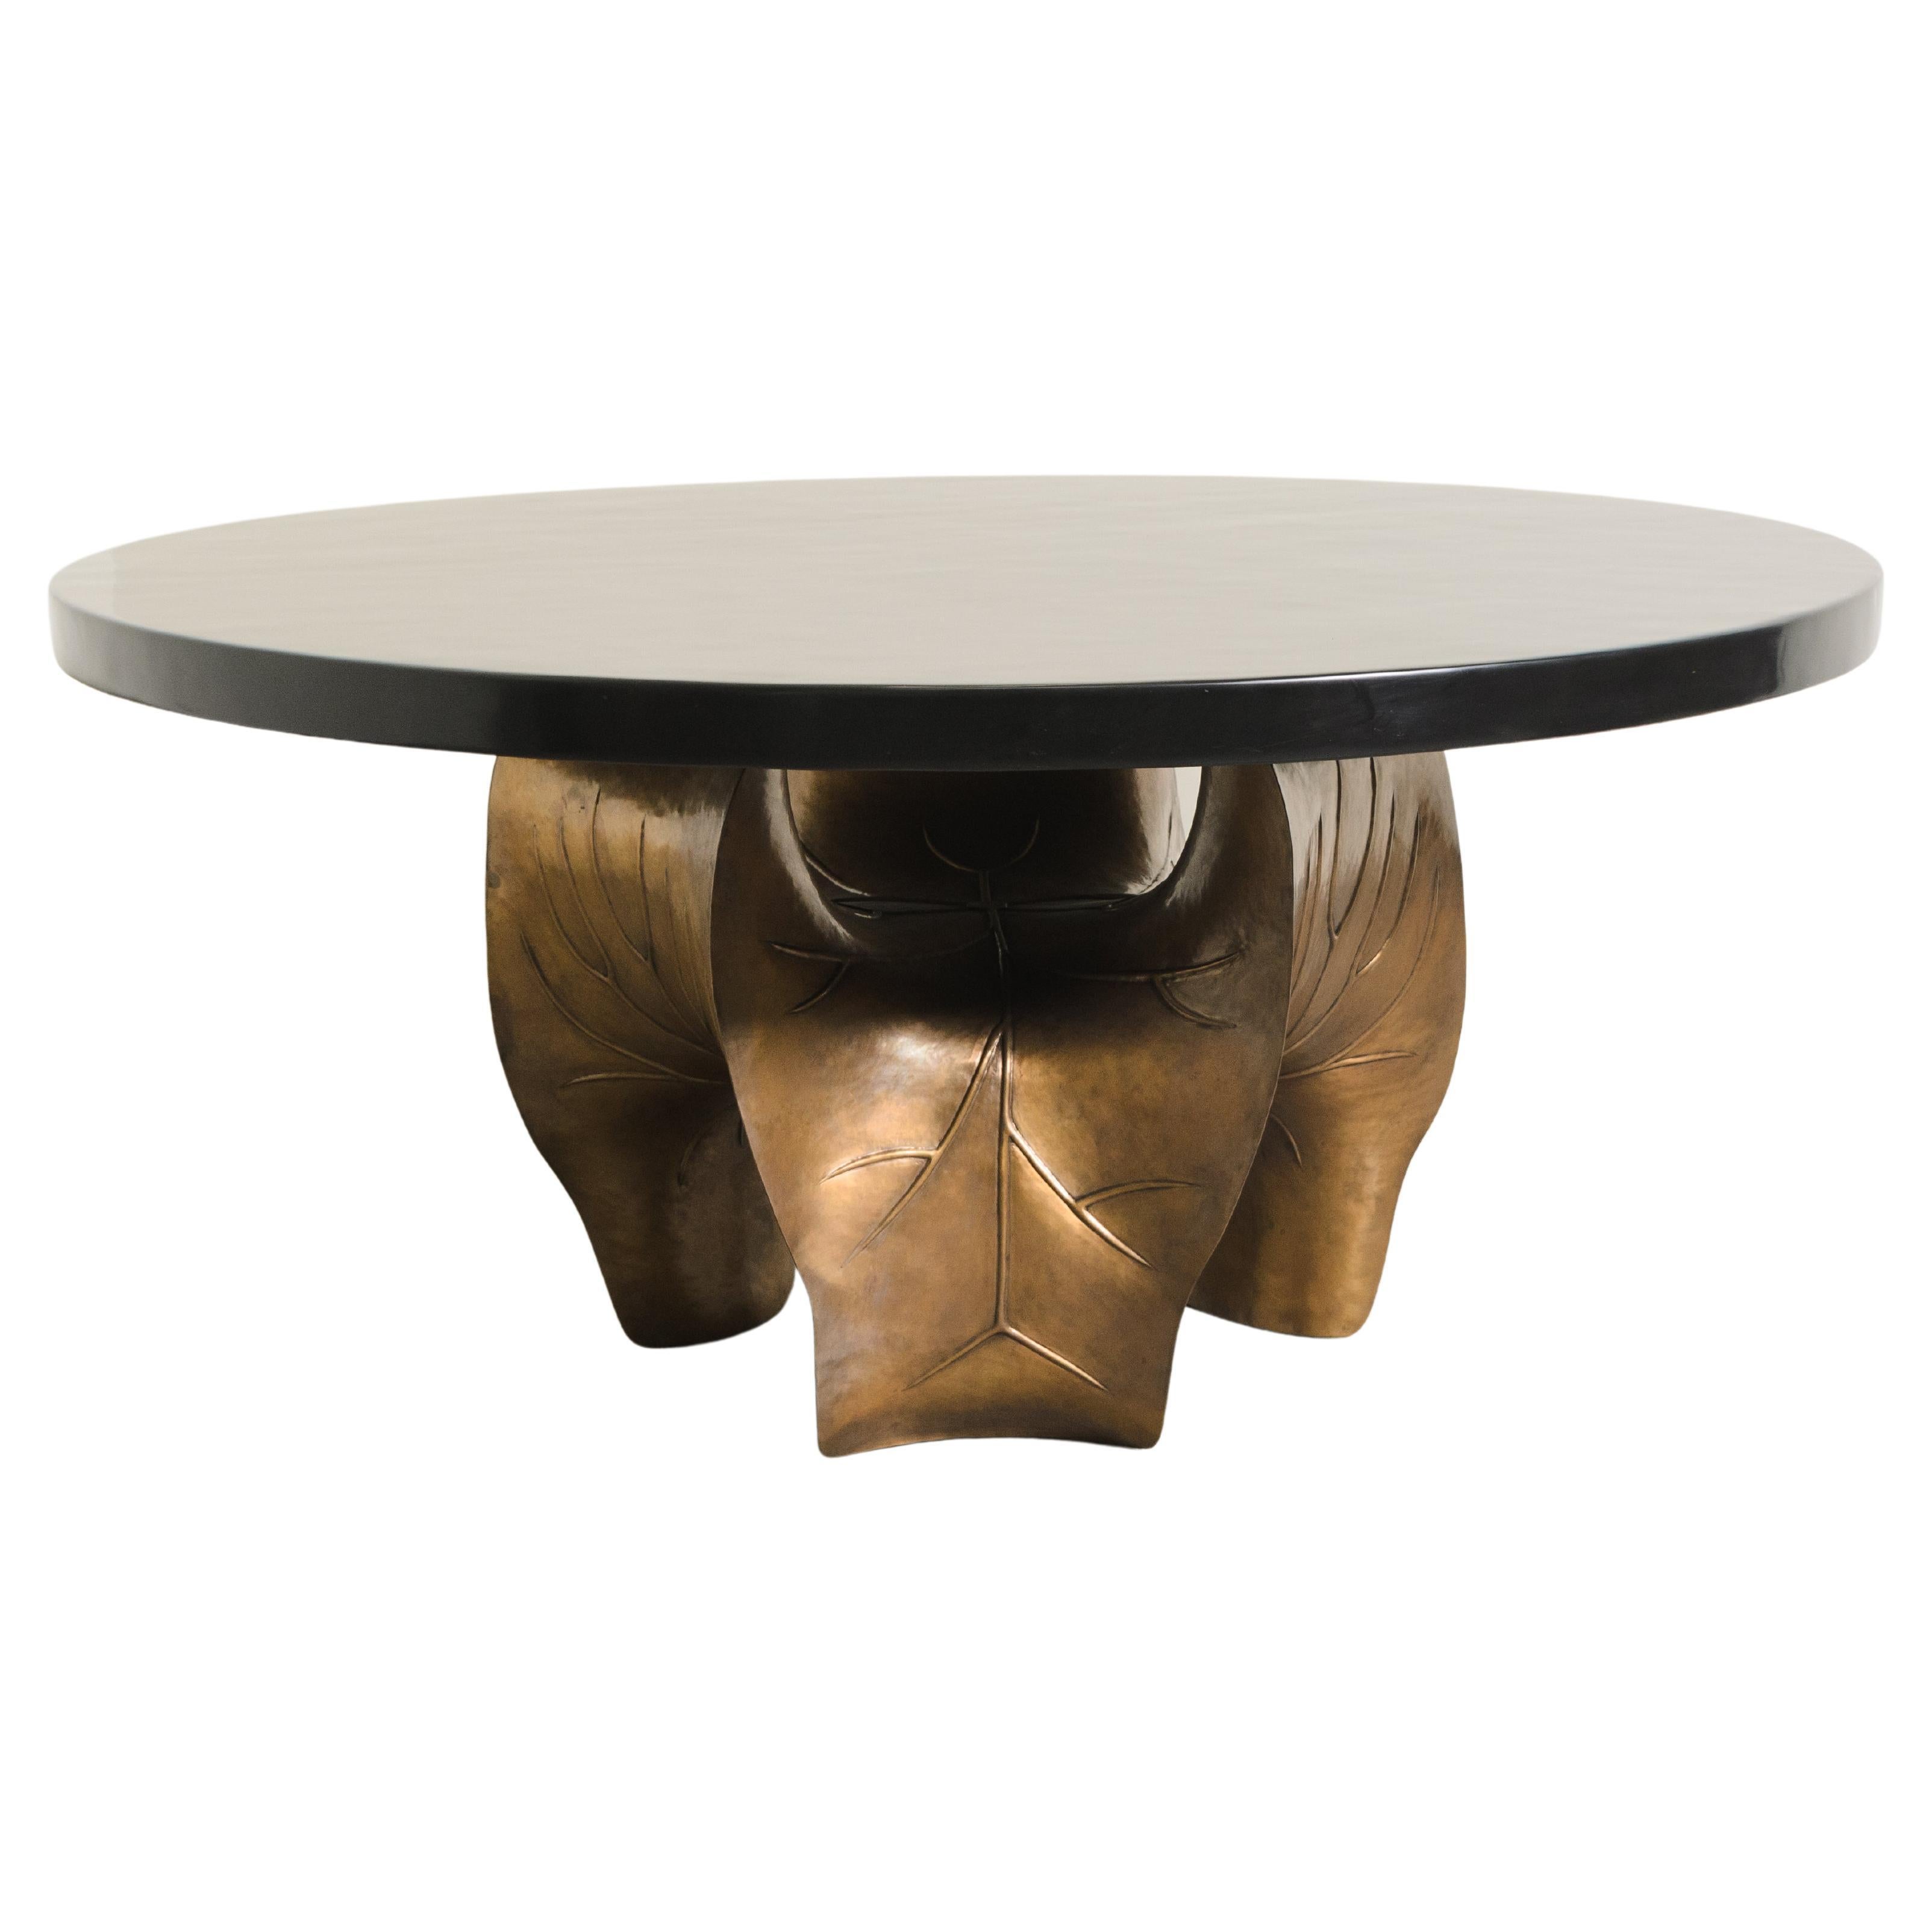 Contemporary Repoussé Lotus Leaf Shape Table Base in Brass by Robert Kuo For Sale